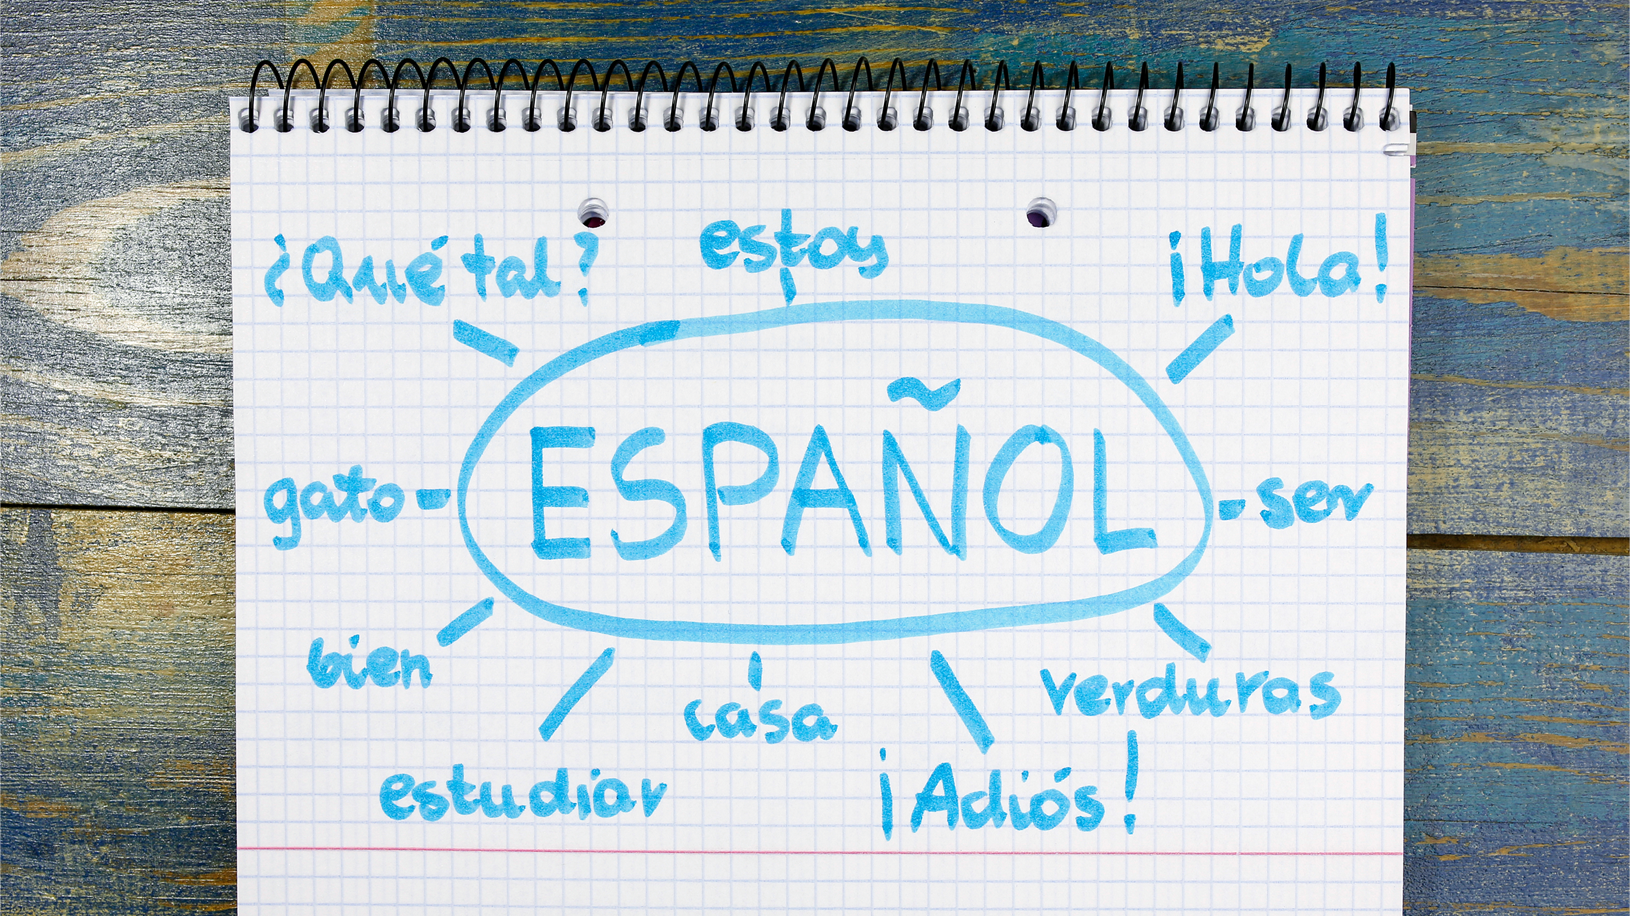 Word web concept of learning Spanish